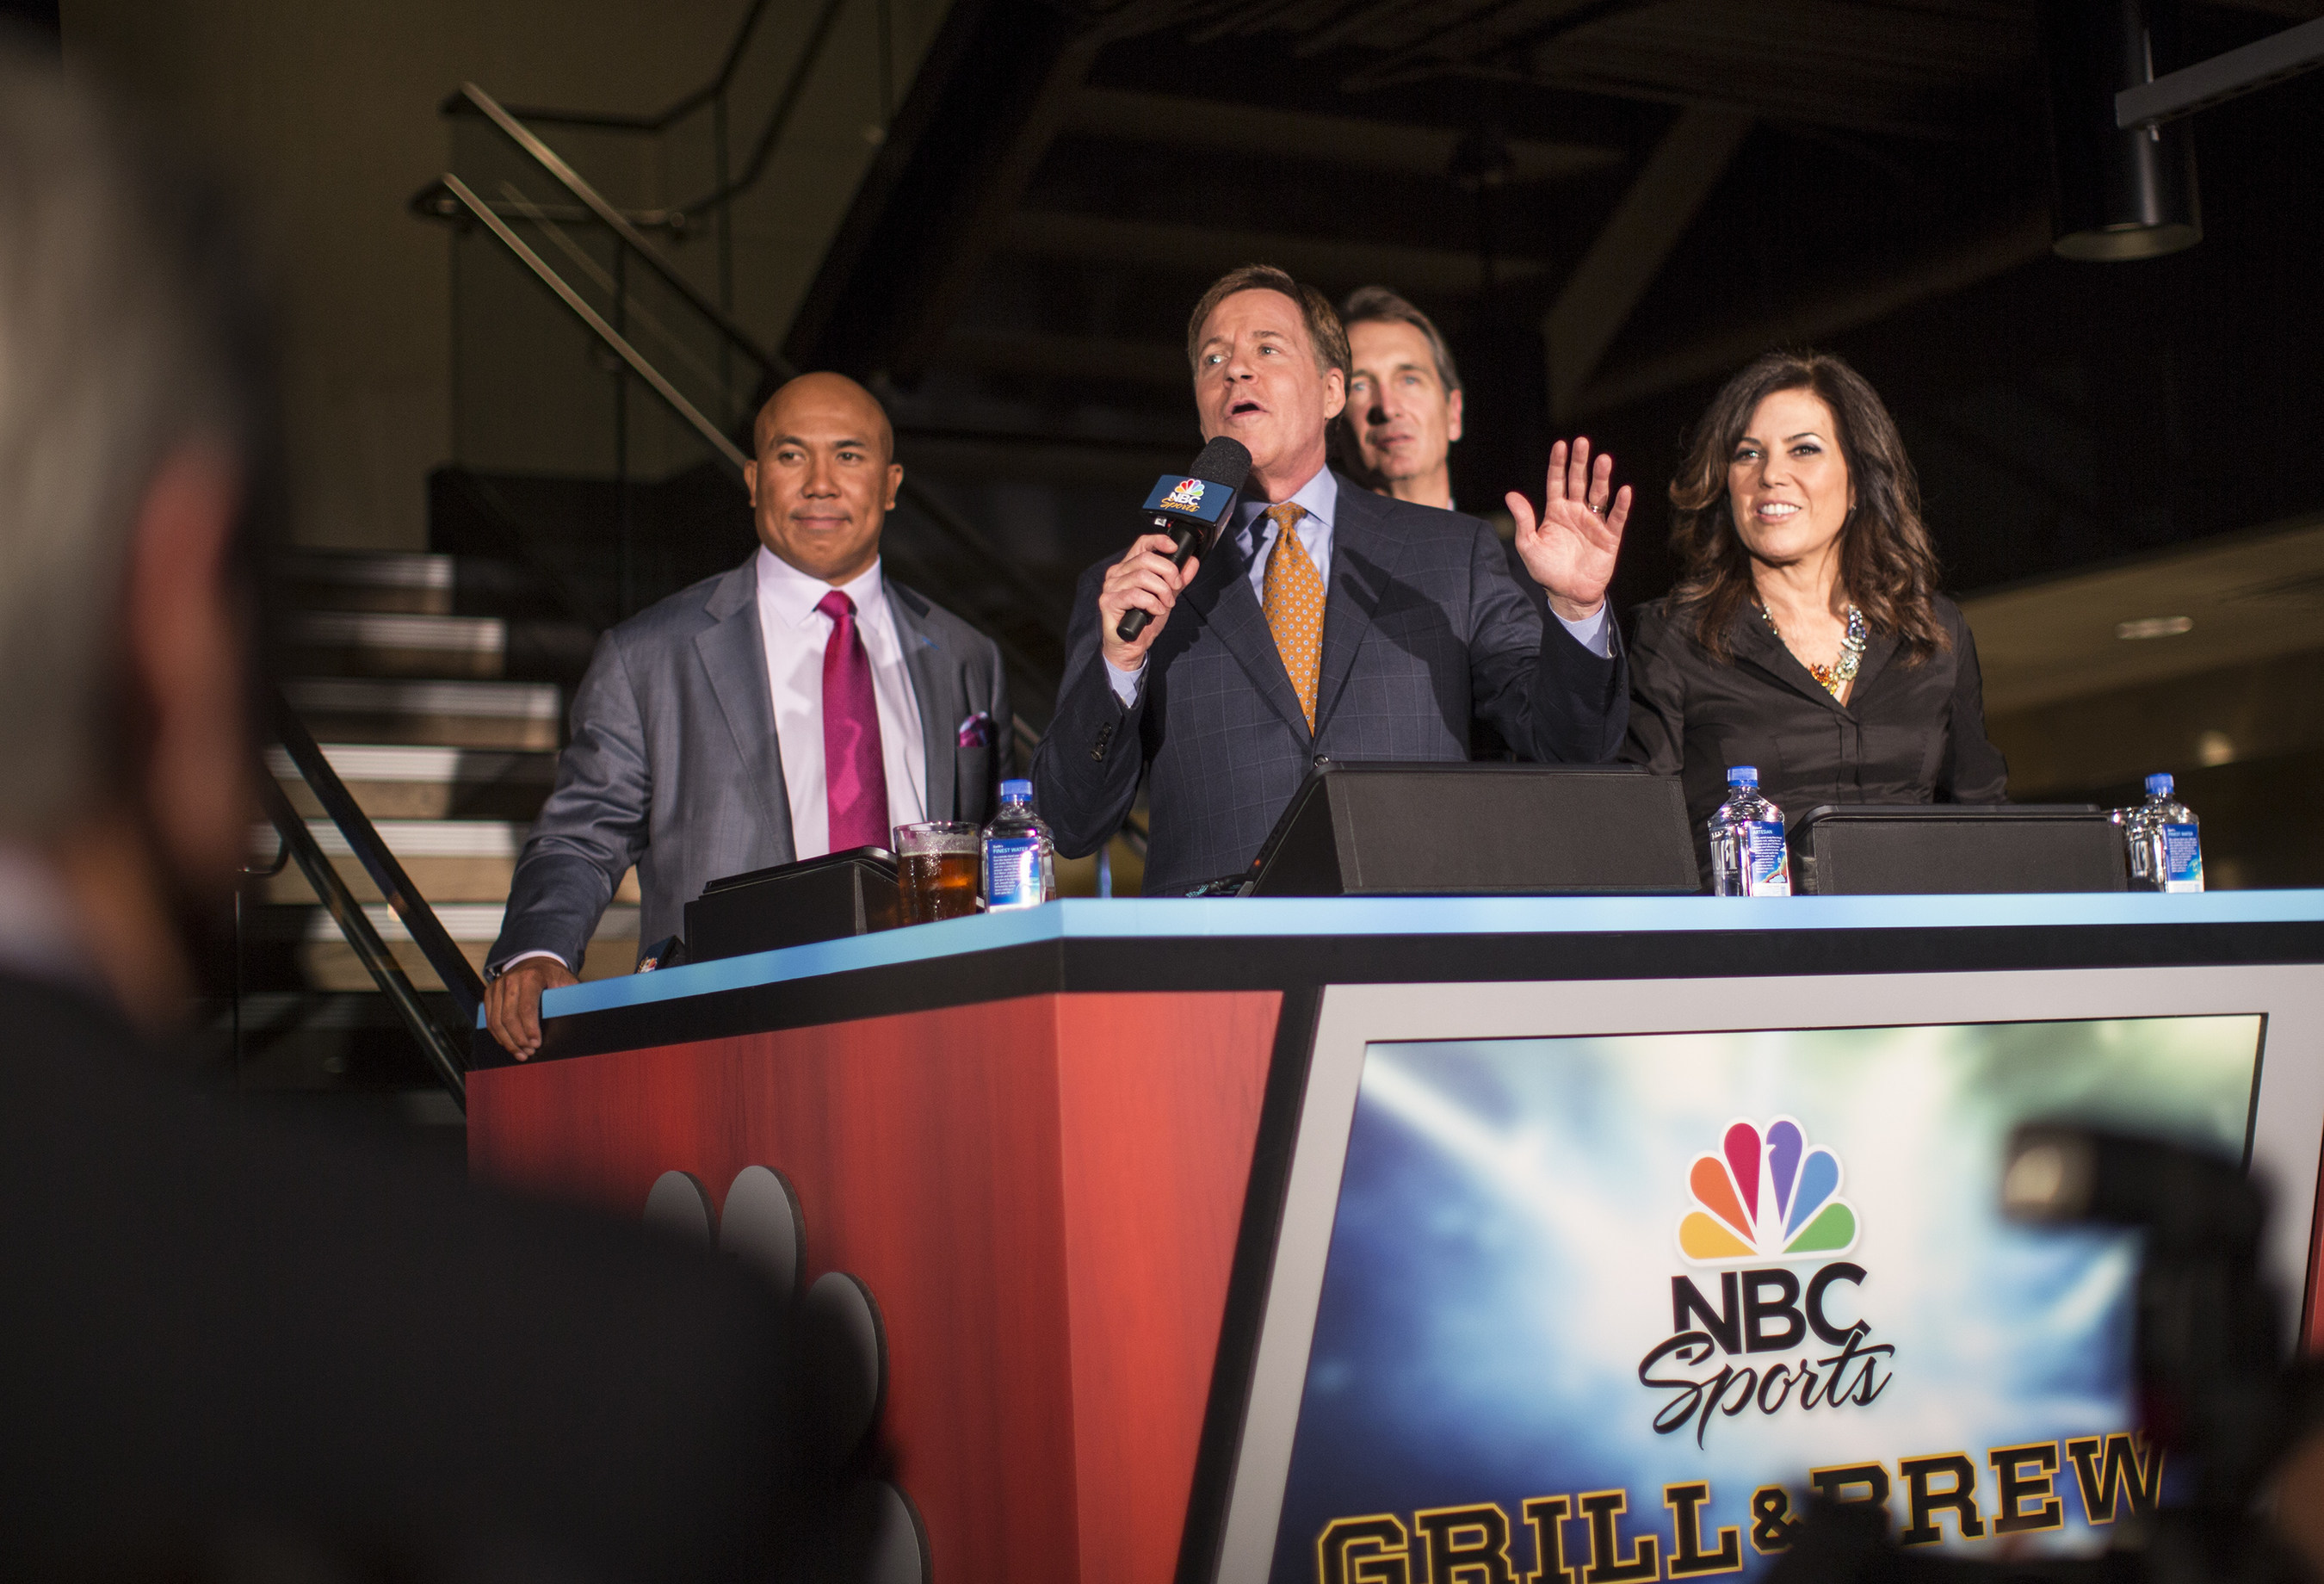 Top NBC Sports commentators - including Cris Collinsworth, Bob Costas, Michele Tafoya and Hines Ward - helped celebrate the grand opening of the world's first-ever NBC Sports Grill & Brew at Universal Orlando Resort.